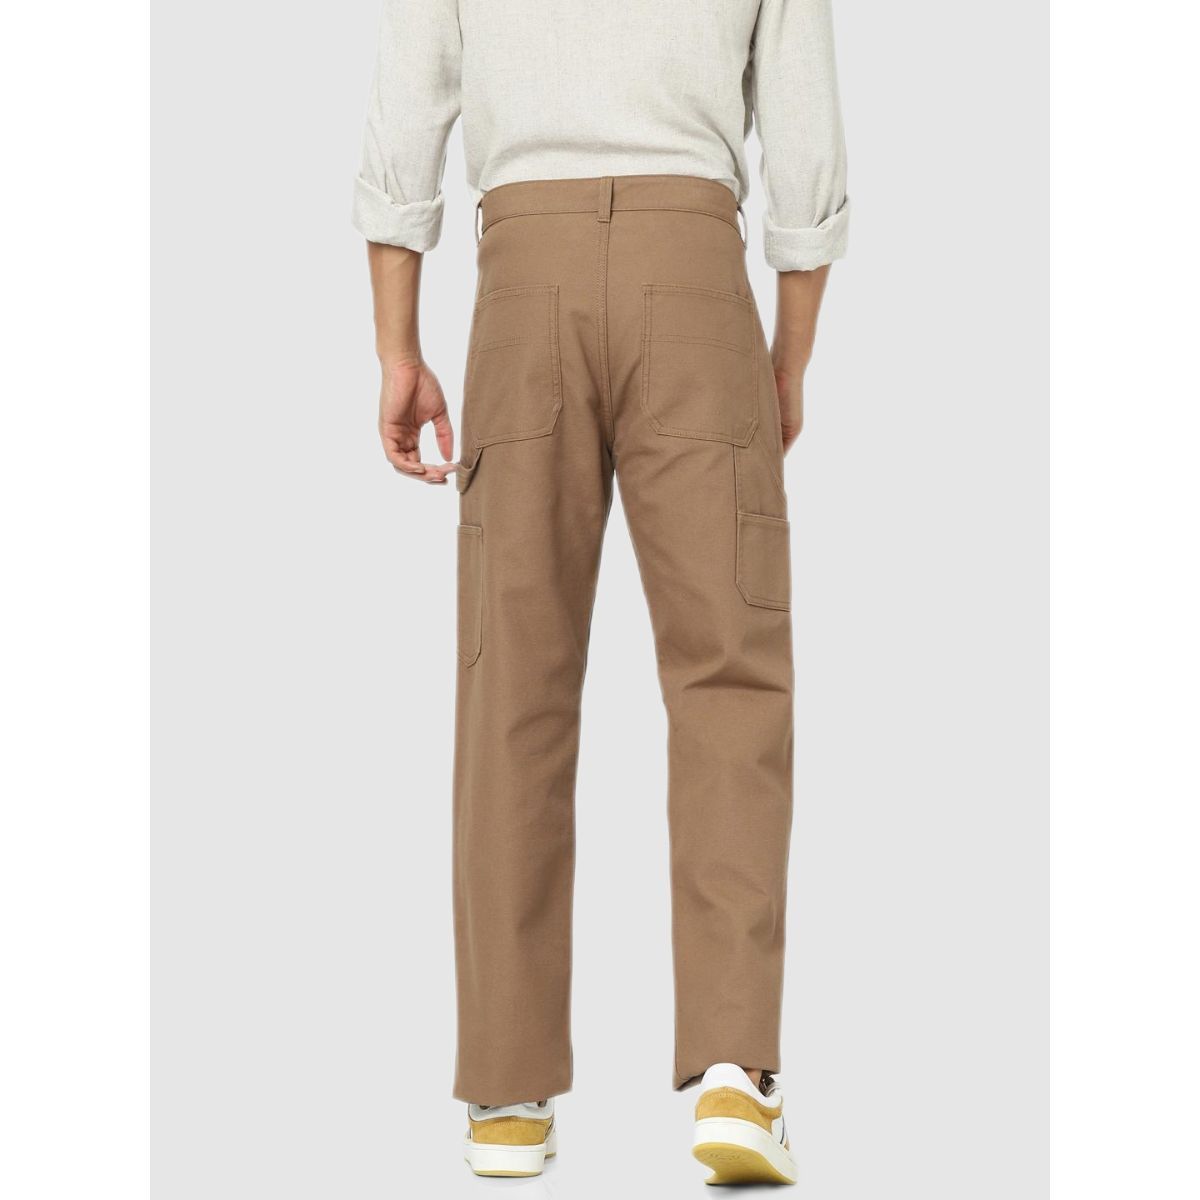 Celio Formal Trousers & Hight Waist Pants sale - discounted price |  FASHIOLA INDIA